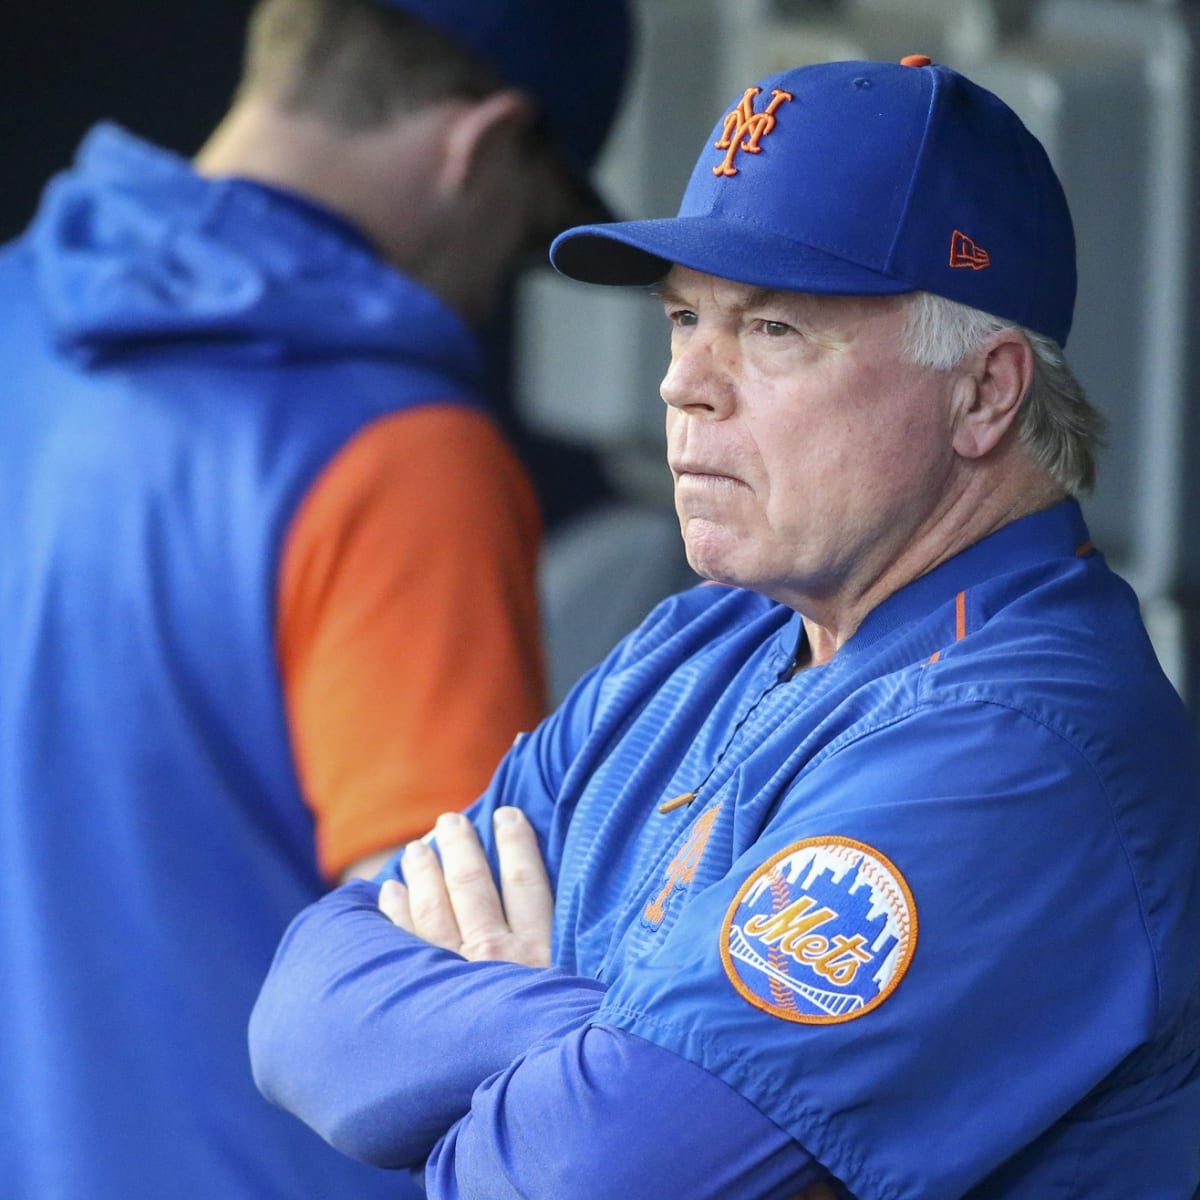 Mets' Buck Showalter wins NL Manager of the Year